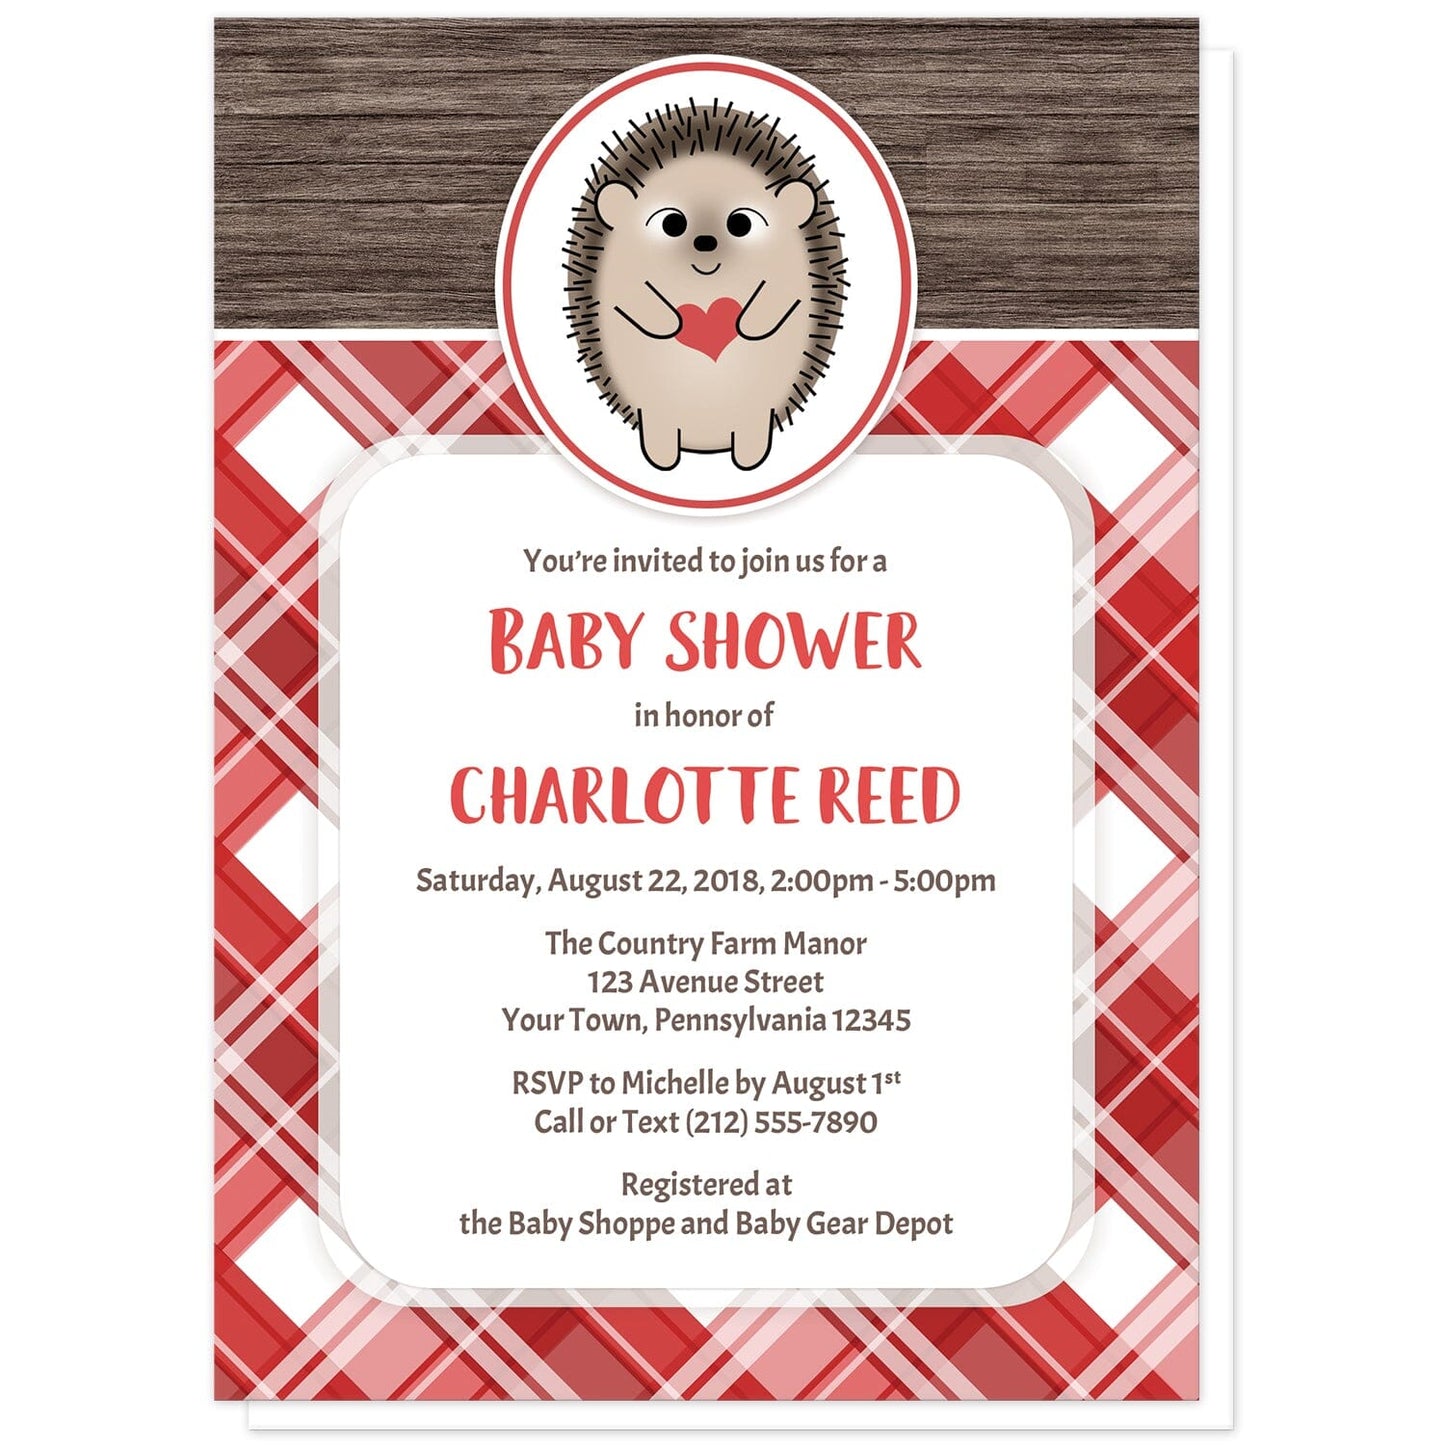 Rustic Hedgehog Heart Red Plaid Baby Shower Invitations at Artistically Invited. Adorable rustic hedgehog heart red plaid baby shower invitations that are illustrated with a cute and smiling hedgehog in a white and red oval over a rustic brown wood background along the top and a red plaid pattern background on the bottom. Your personalized baby shower celebration details are custom printed in red and brown in a white rectangular area over the red plaid pattern.